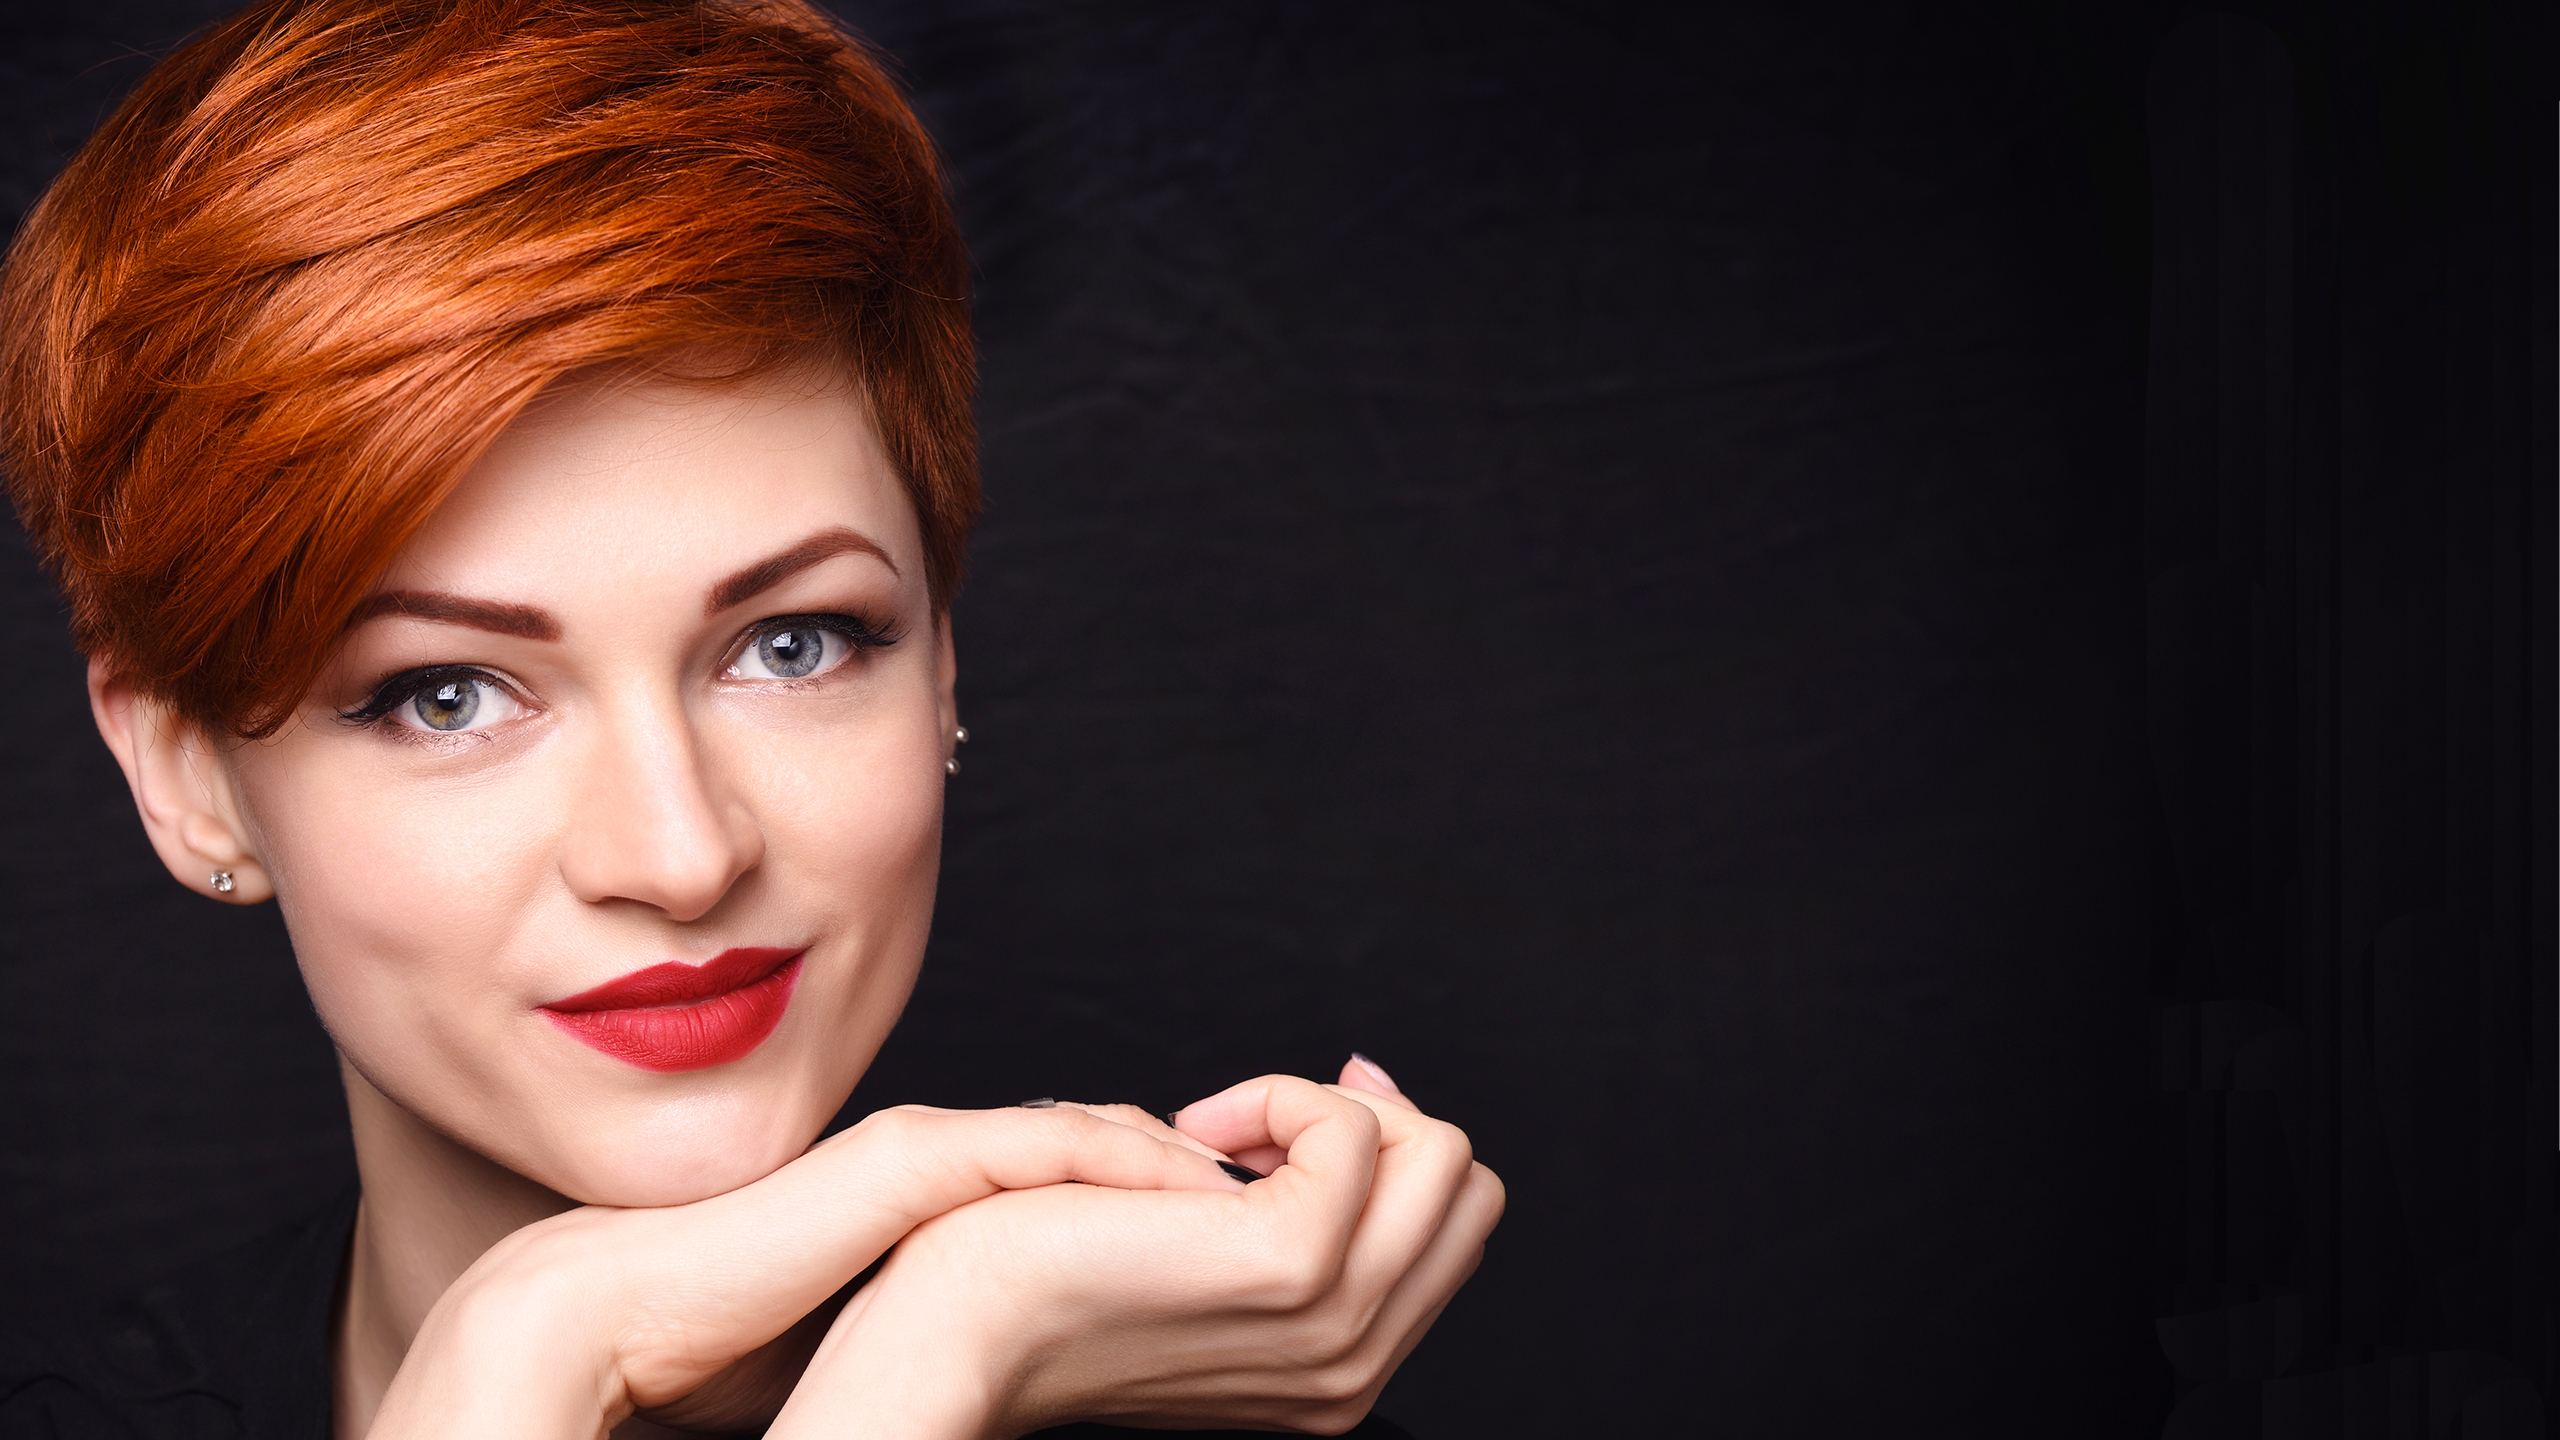 Woman with short red hair